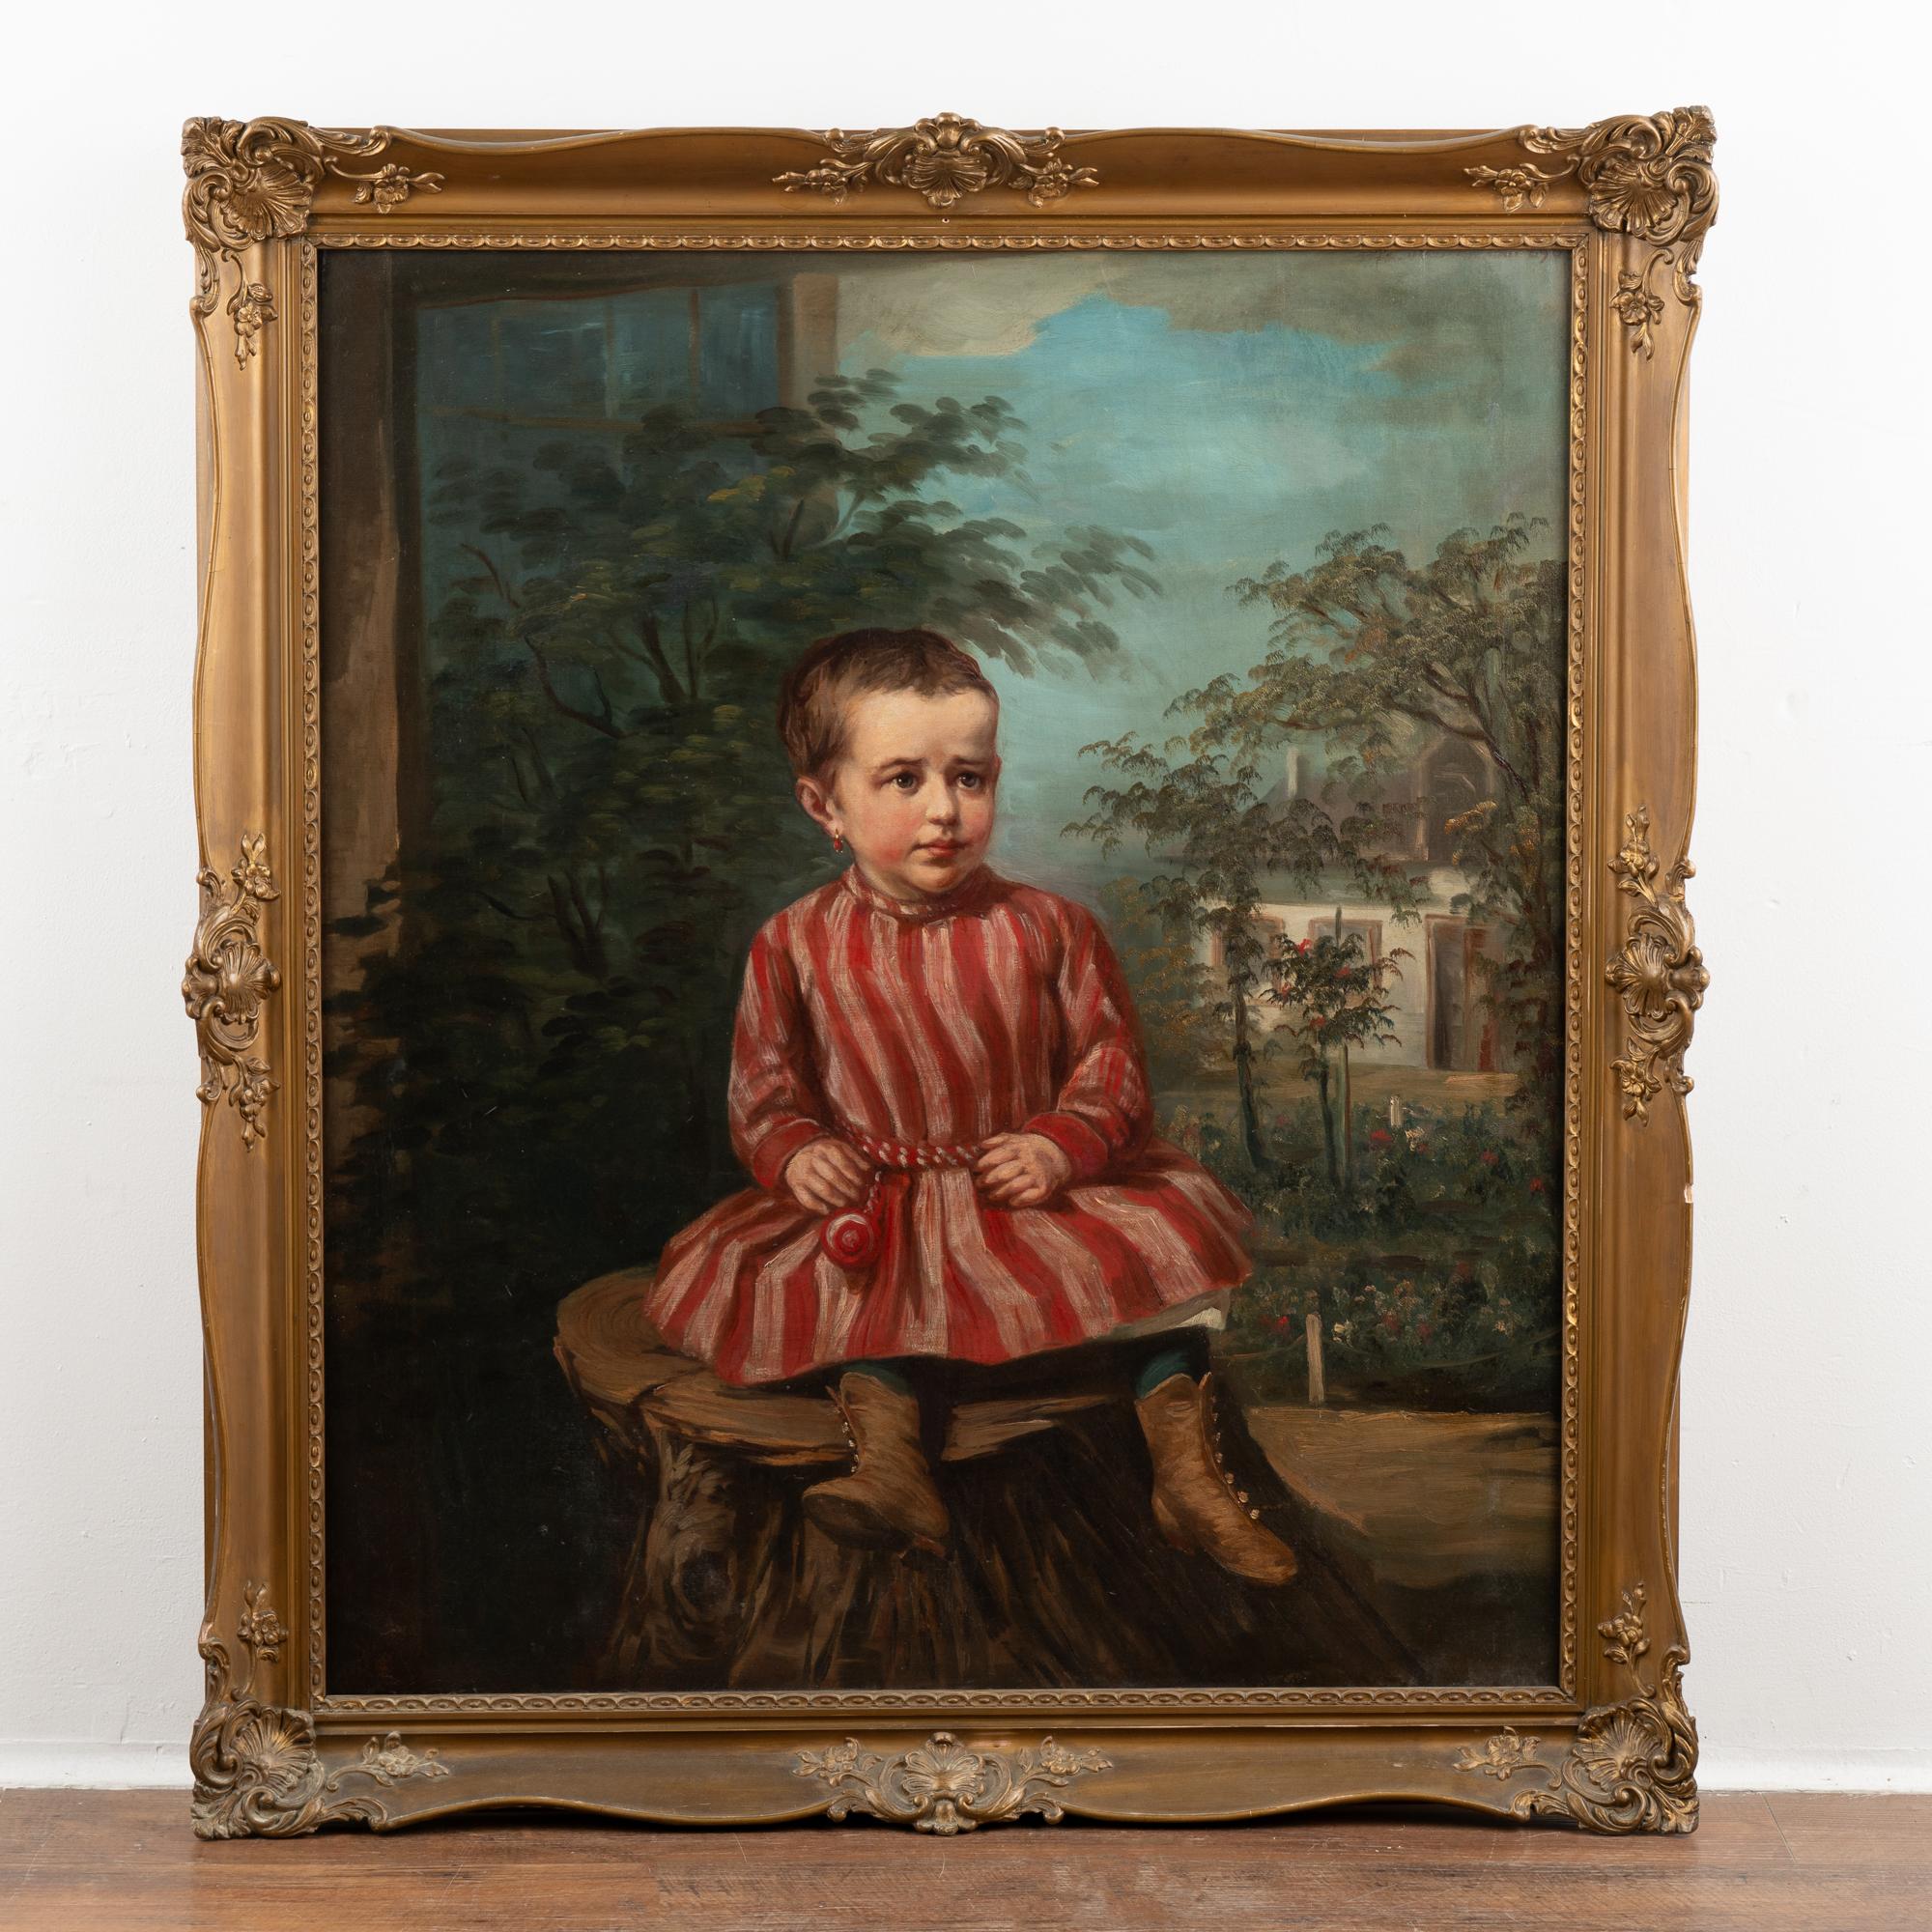 Original oil on canvas painting of young girl in bright red dress sitting on tree stump.
Signature and date in upper right corner, mostly covered by frame.
Canvas in good age related condition, old repairs (see photo of back), minor scratches and